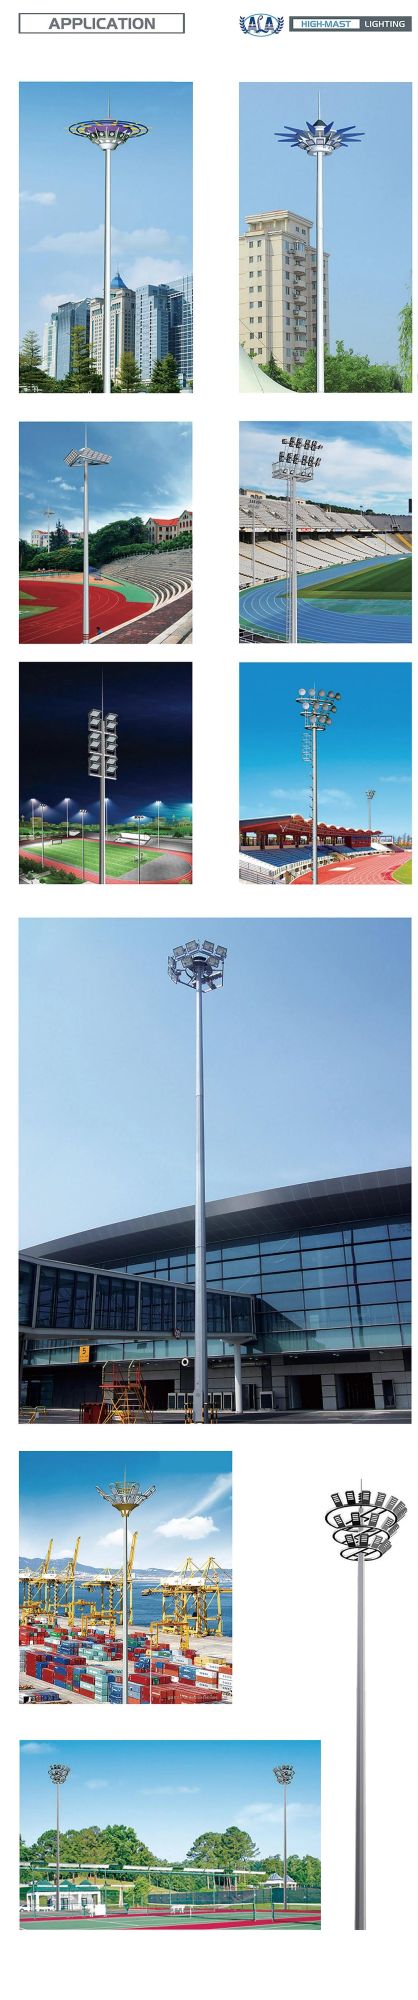 Ala 200W Airport Stadium High Mast Lamp with Raising and Lowering Device